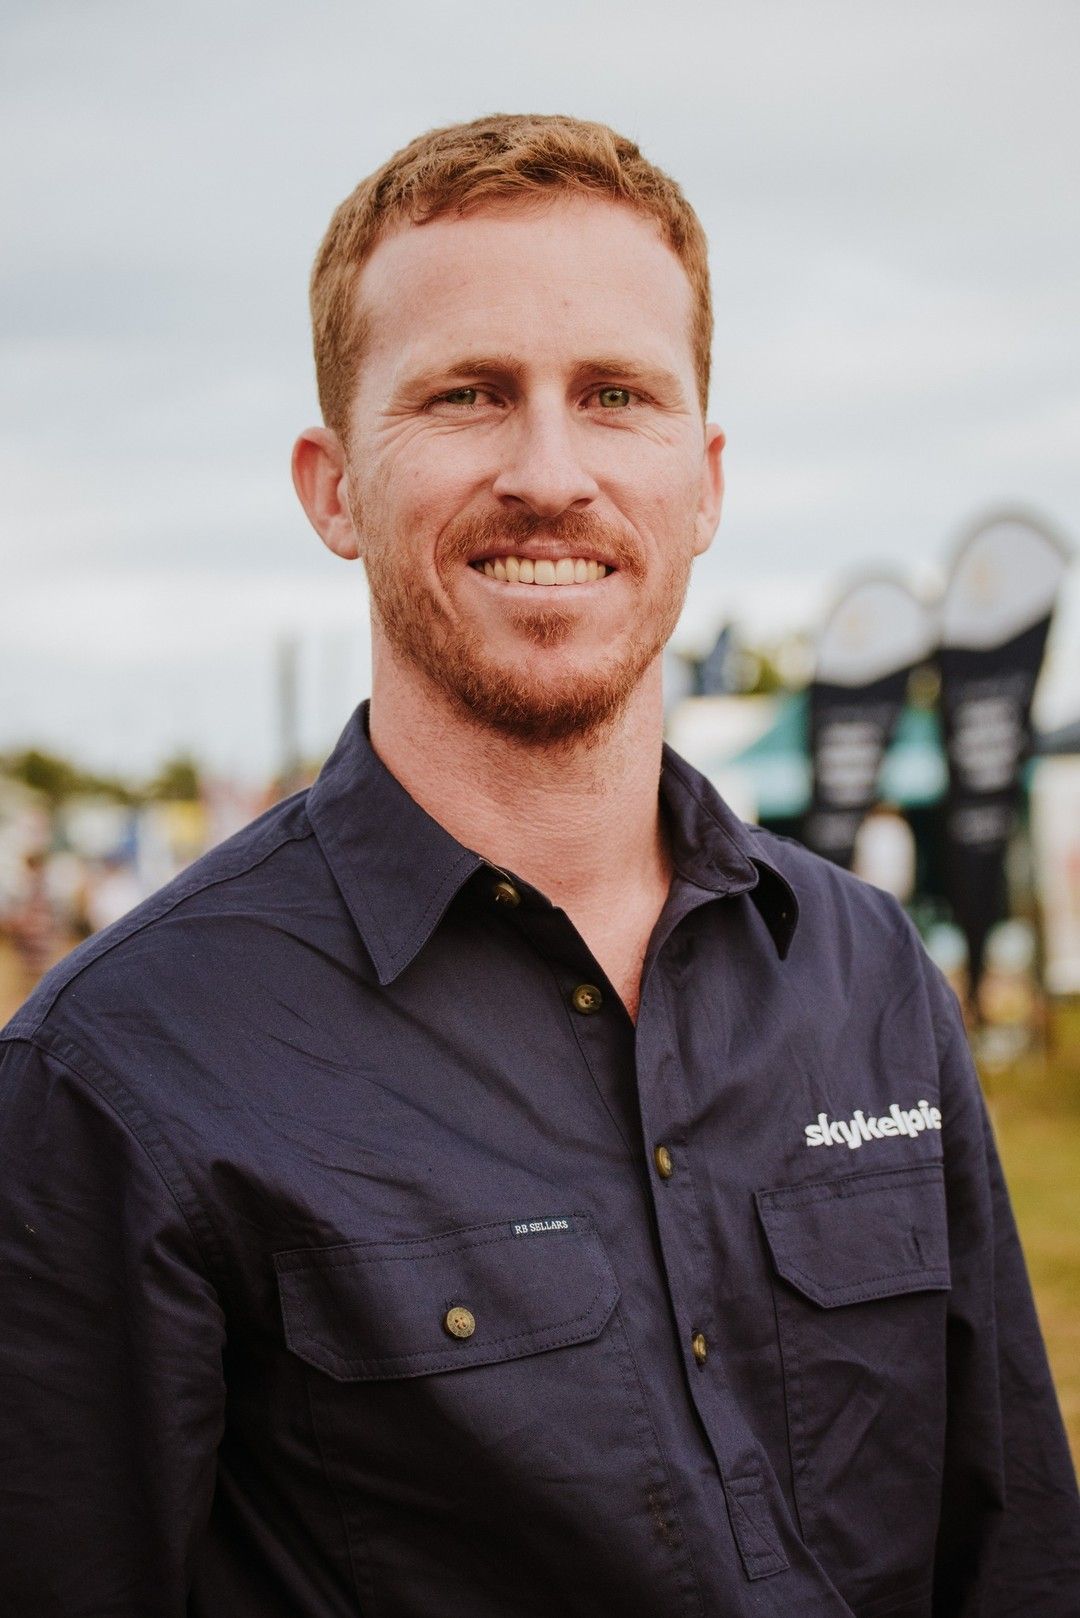 Best of Beef24 | Luke Chaplain

Innovation is one of the big drawcards a...

#RBSellars #Beef24 #Beef2024